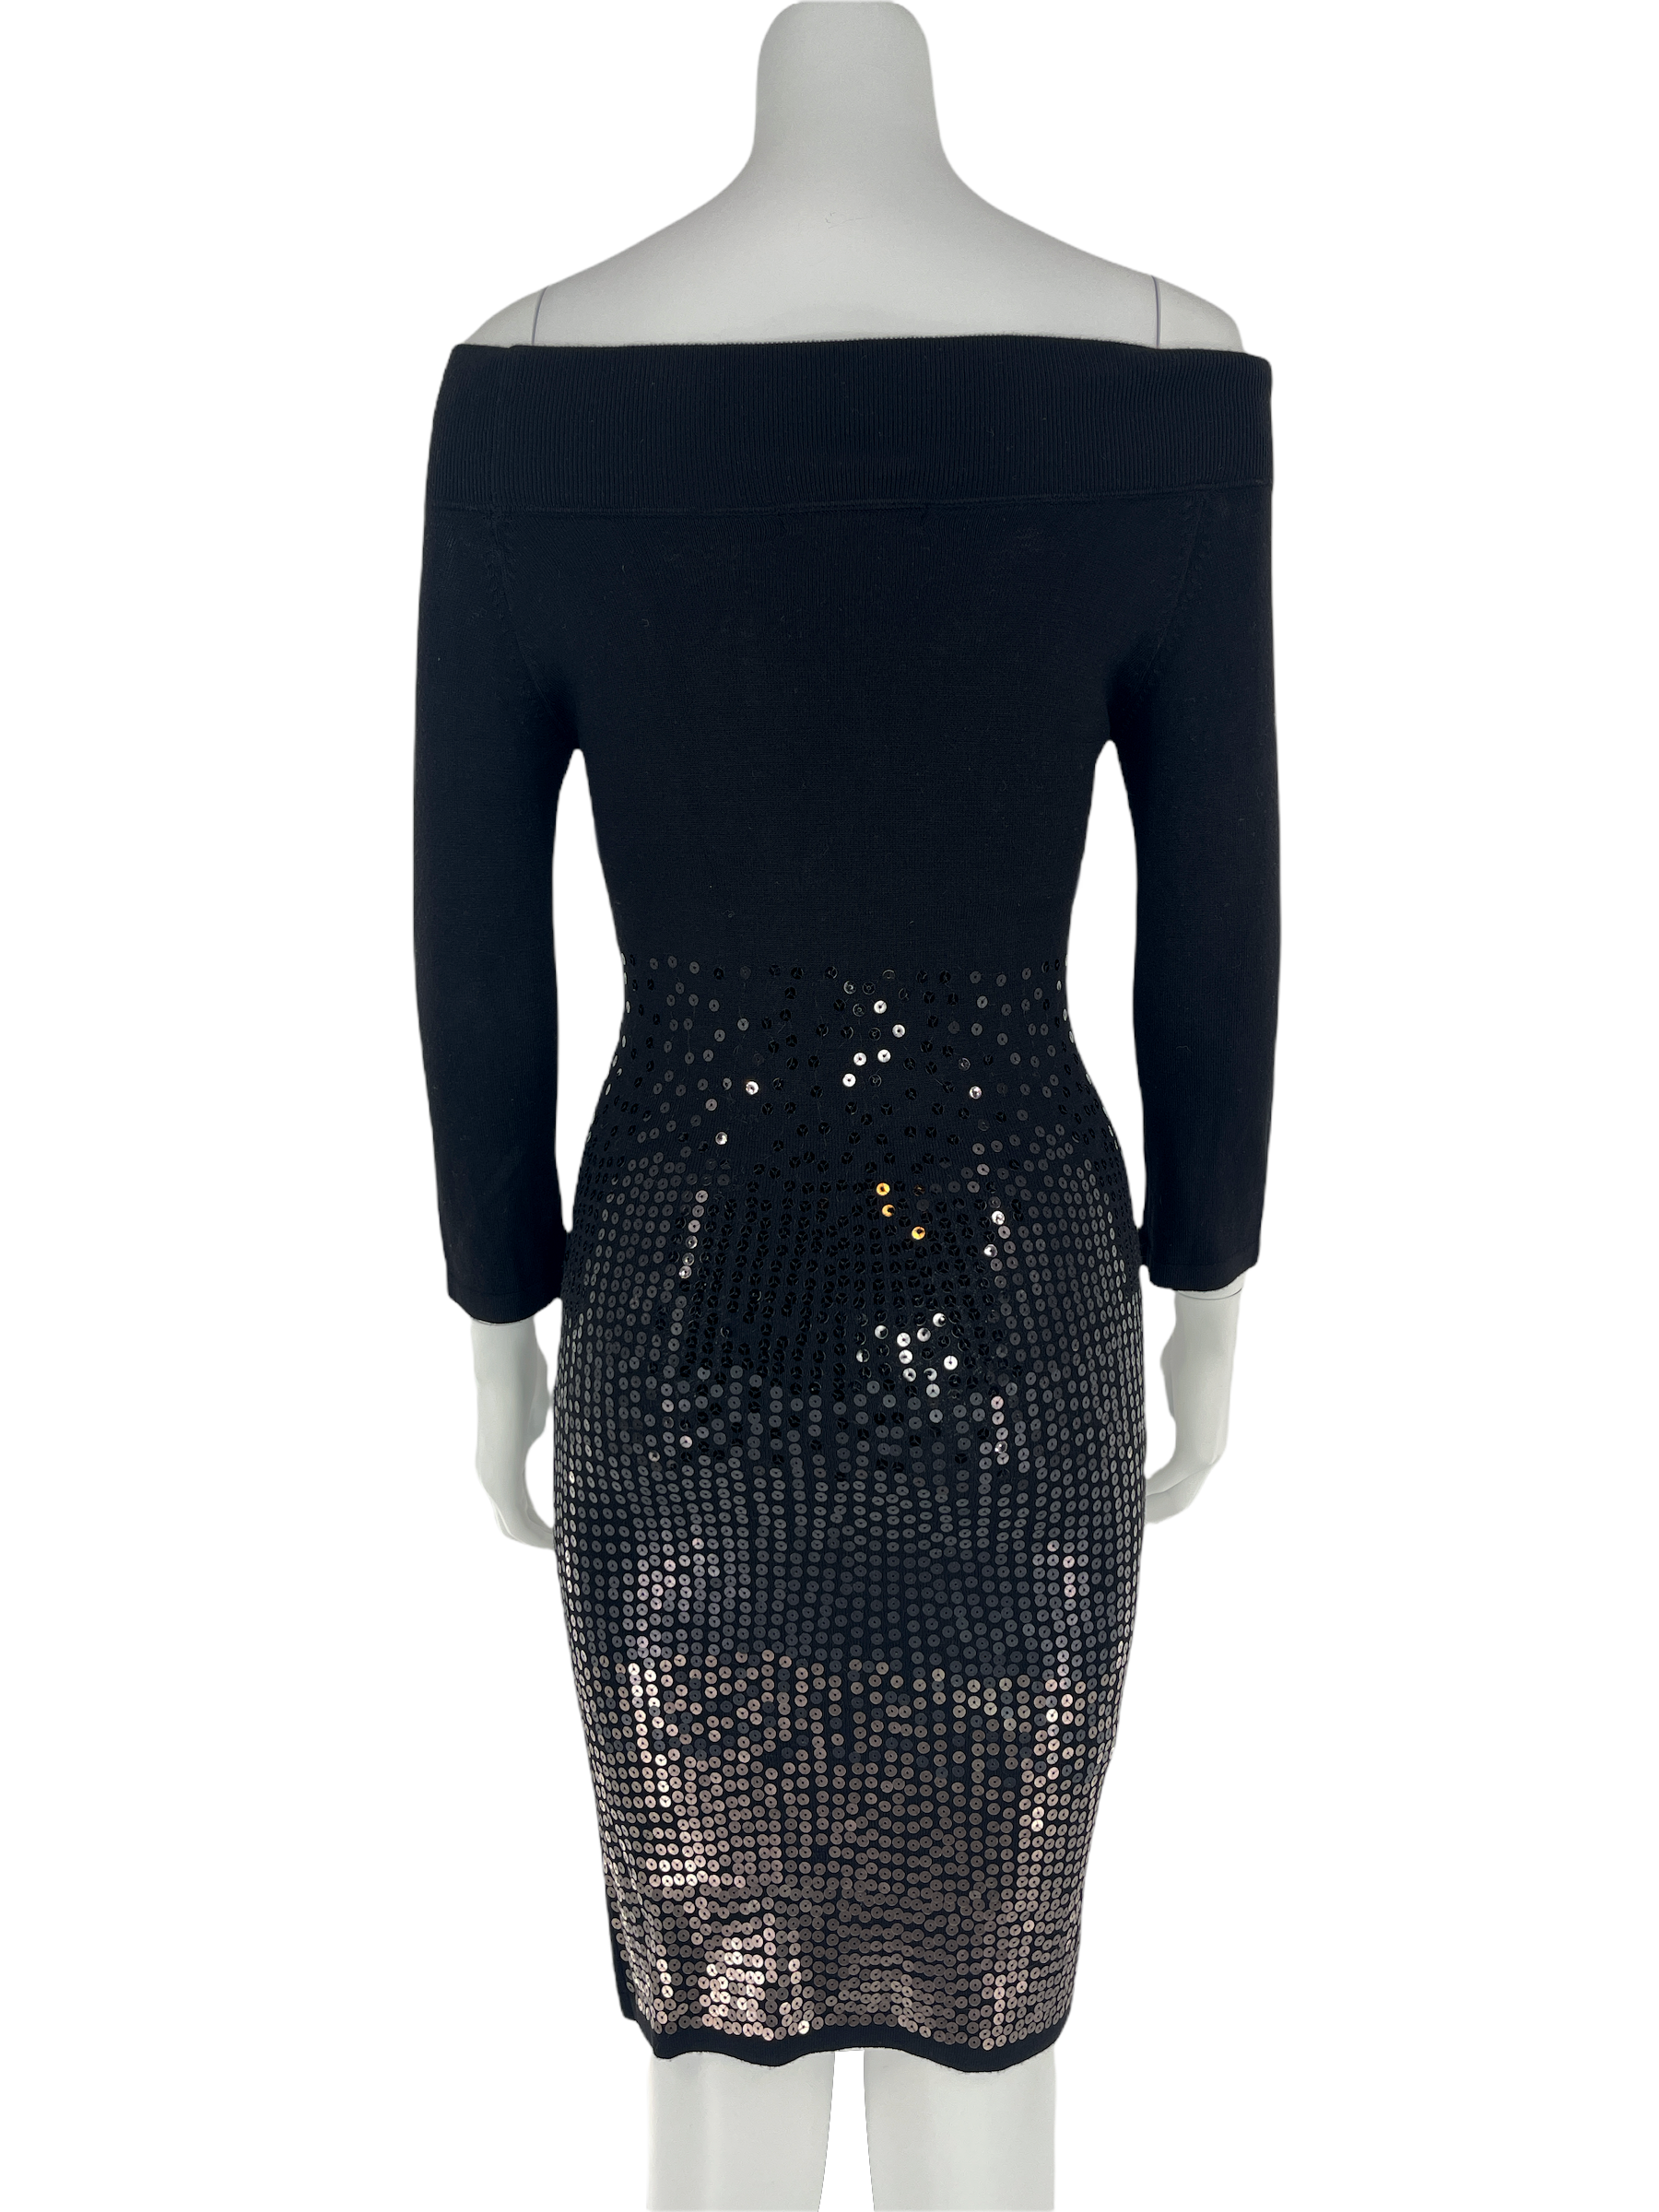 Glittery Sequin Bodycon Pencil Dress For Women Sexy Solid Ruched Long  Sleeve Shimmer Party Dress In Autumn/Winter From Luote, $20.8 | DHgate.Com